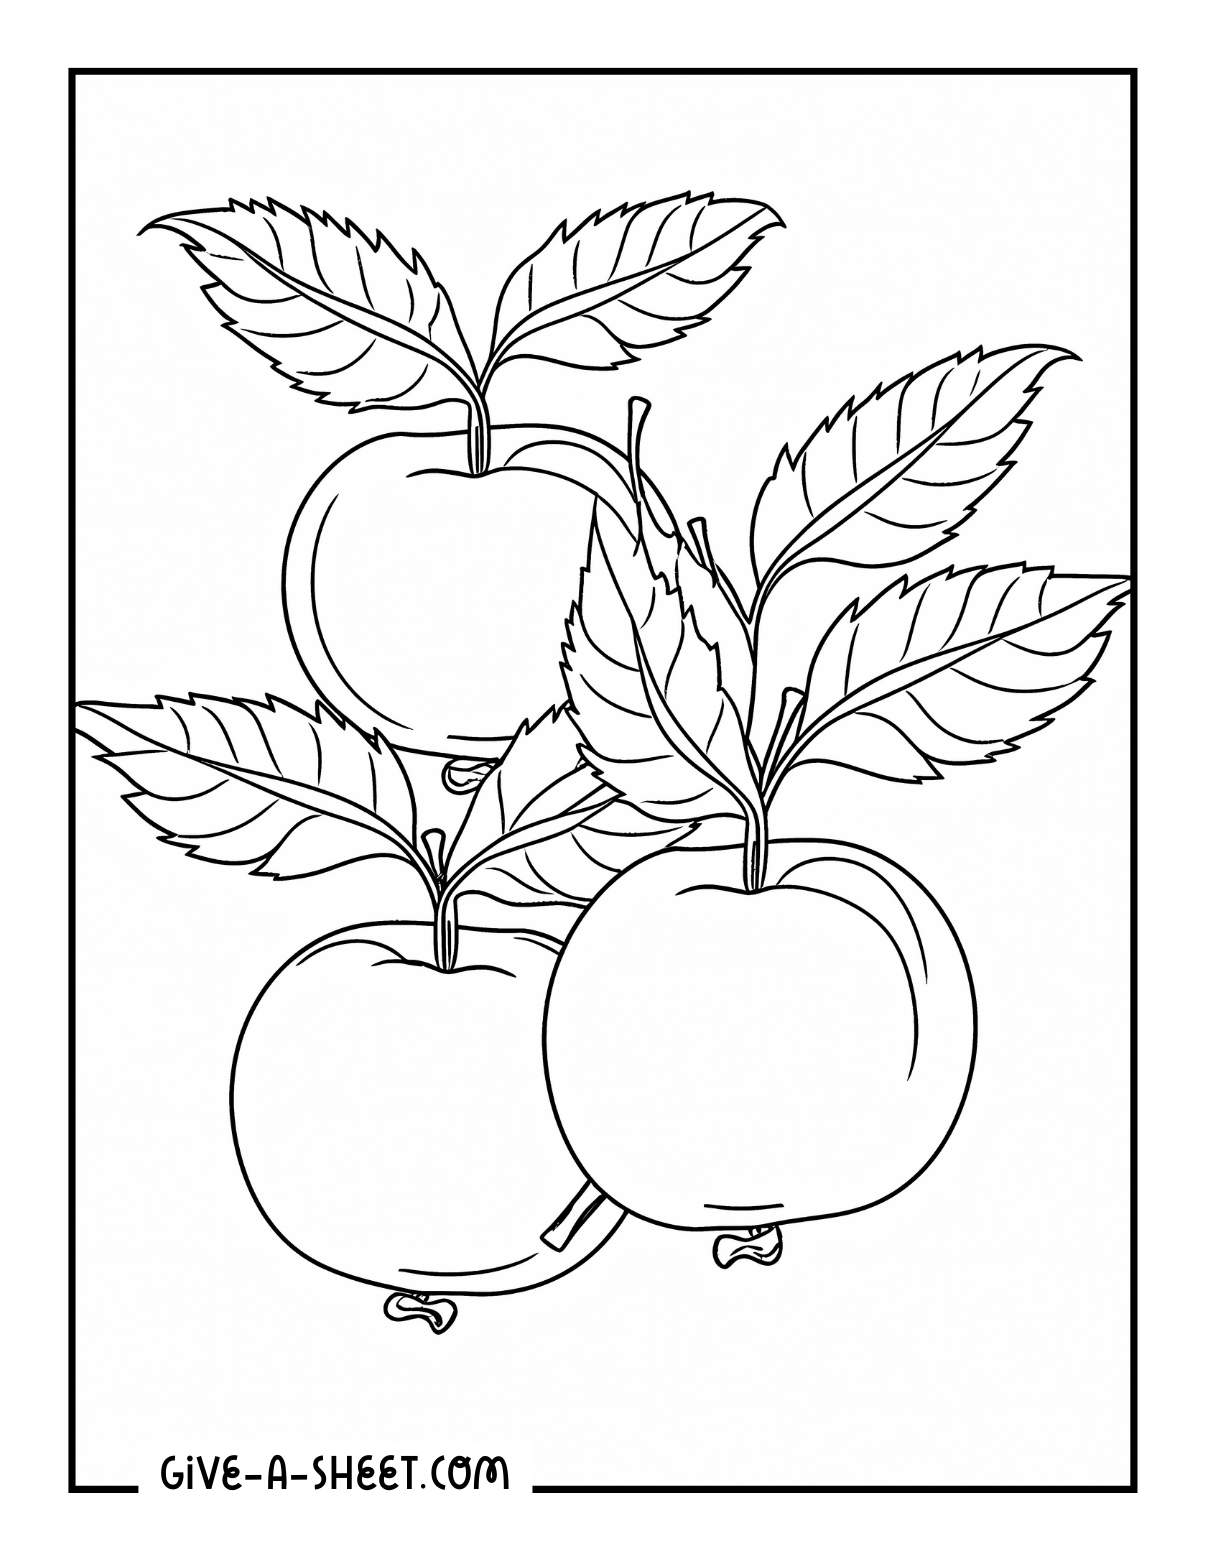 Three apple blossoms outline to color in.